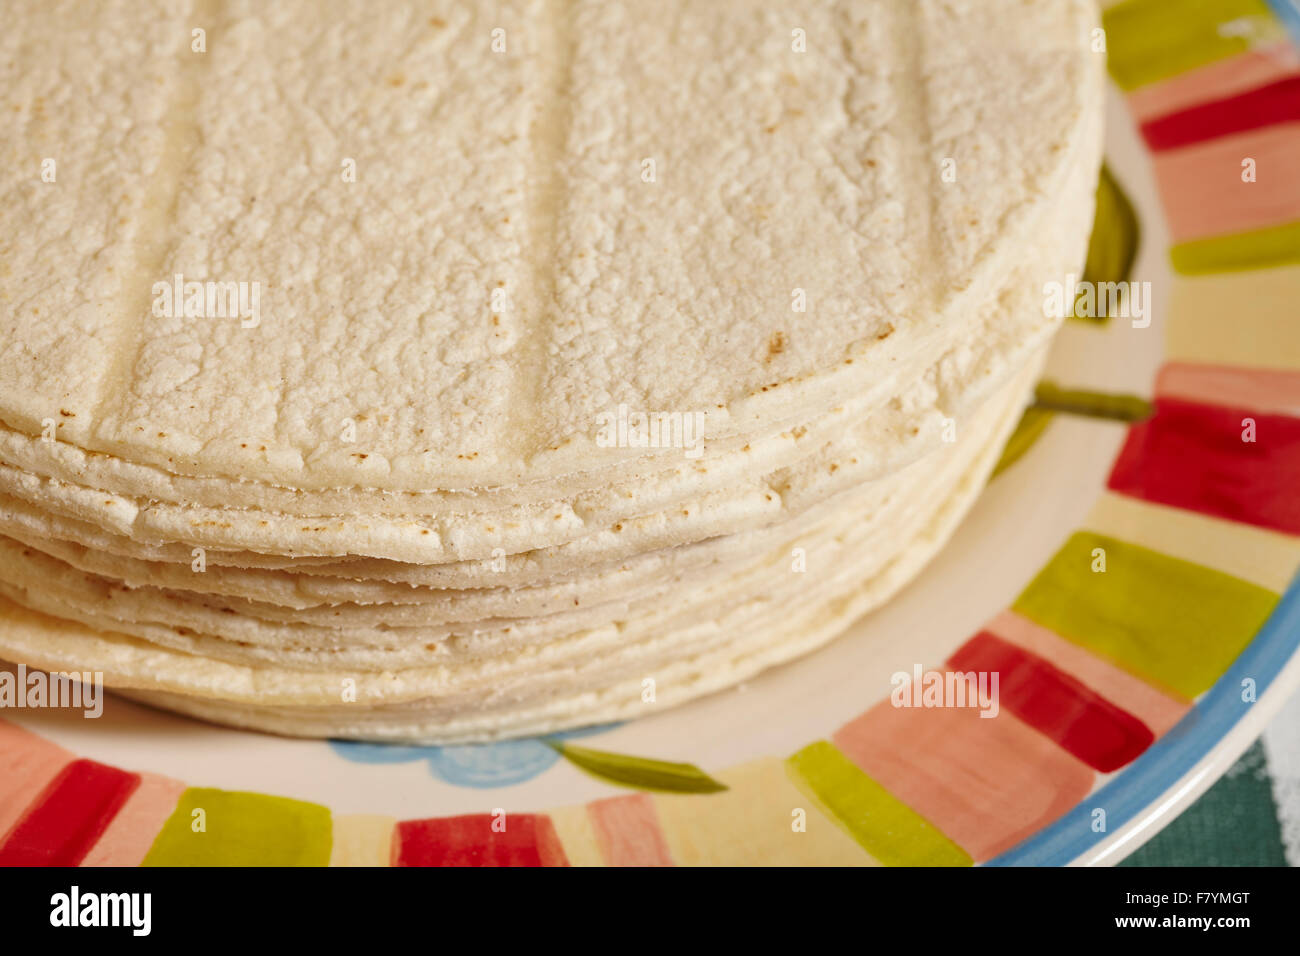 commercially produced corn tortillas, the Mexican staple food Stock Photo